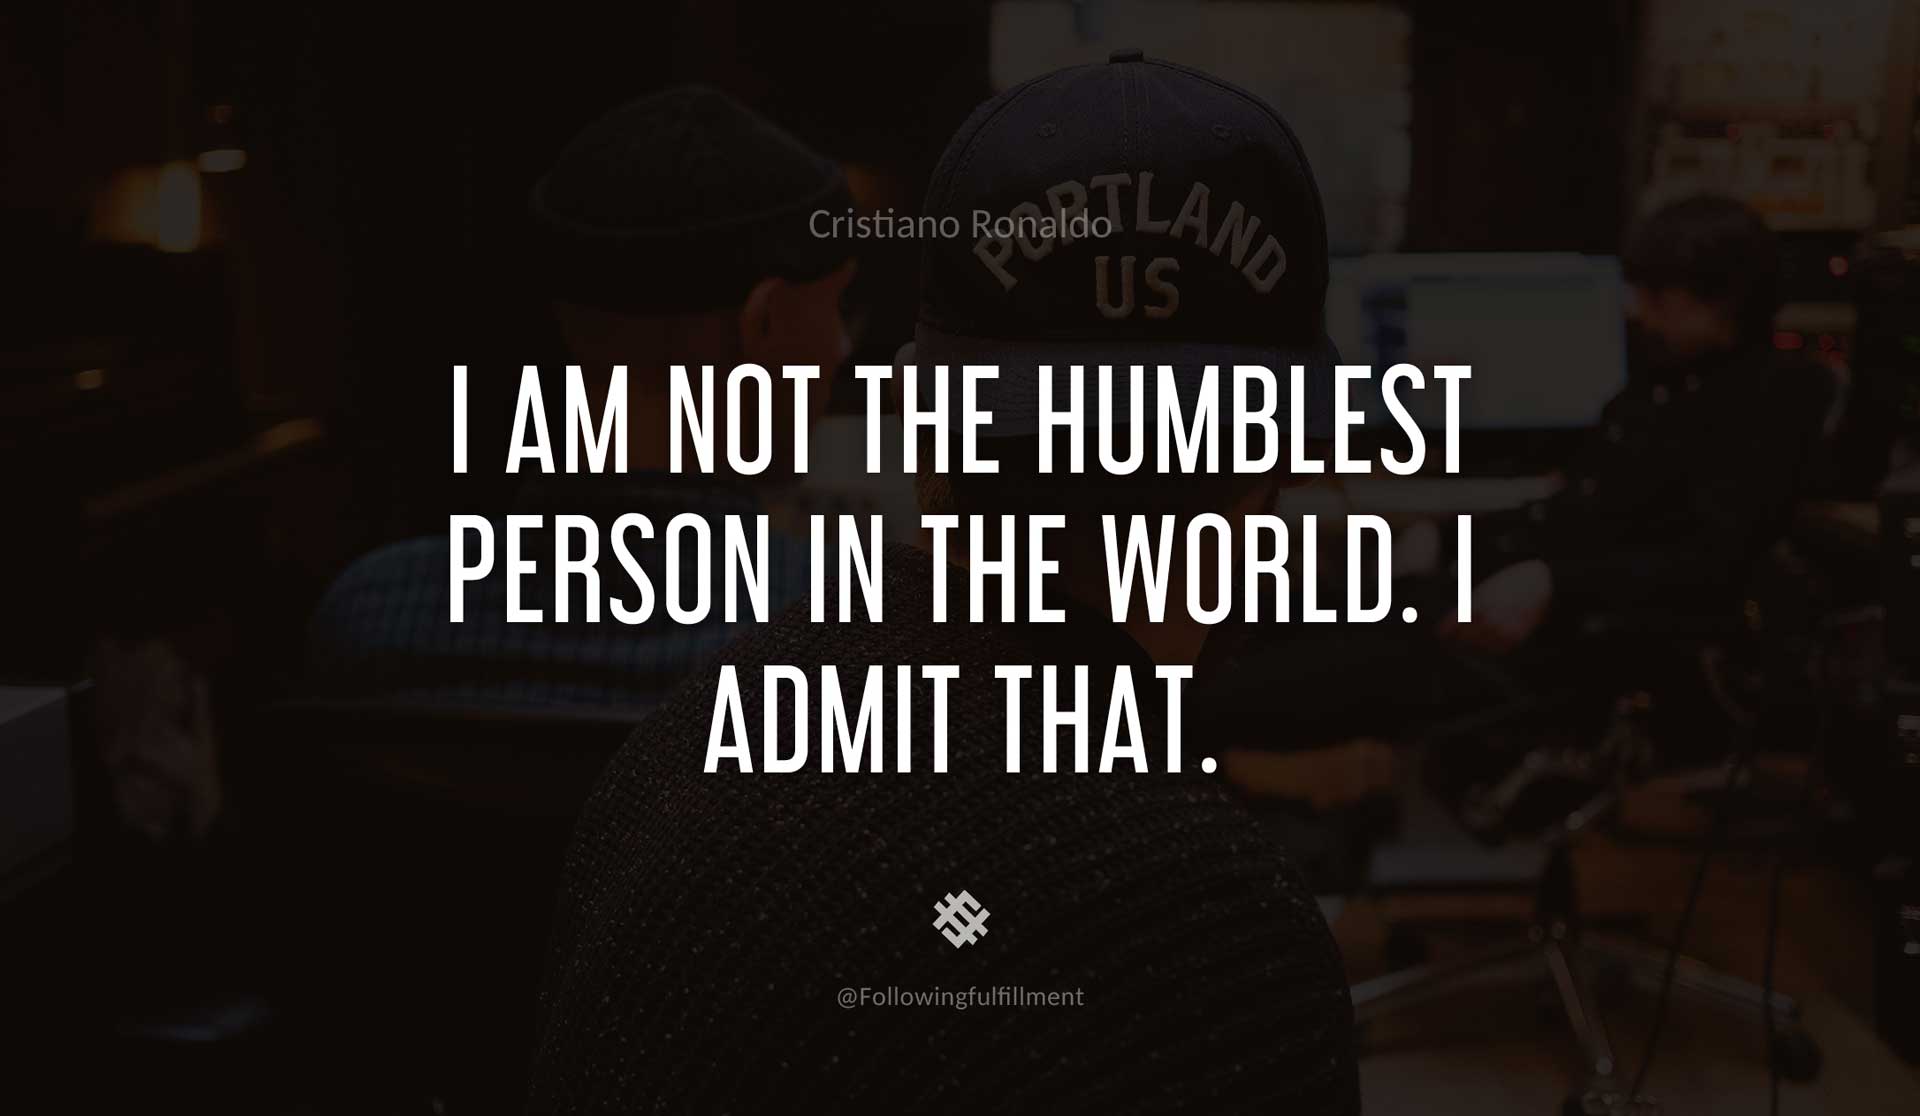 I-am-not-the-humblest-person-in-the-world.-I-admit-that.-CRISTIANO-RONALDO-Quote.jpg